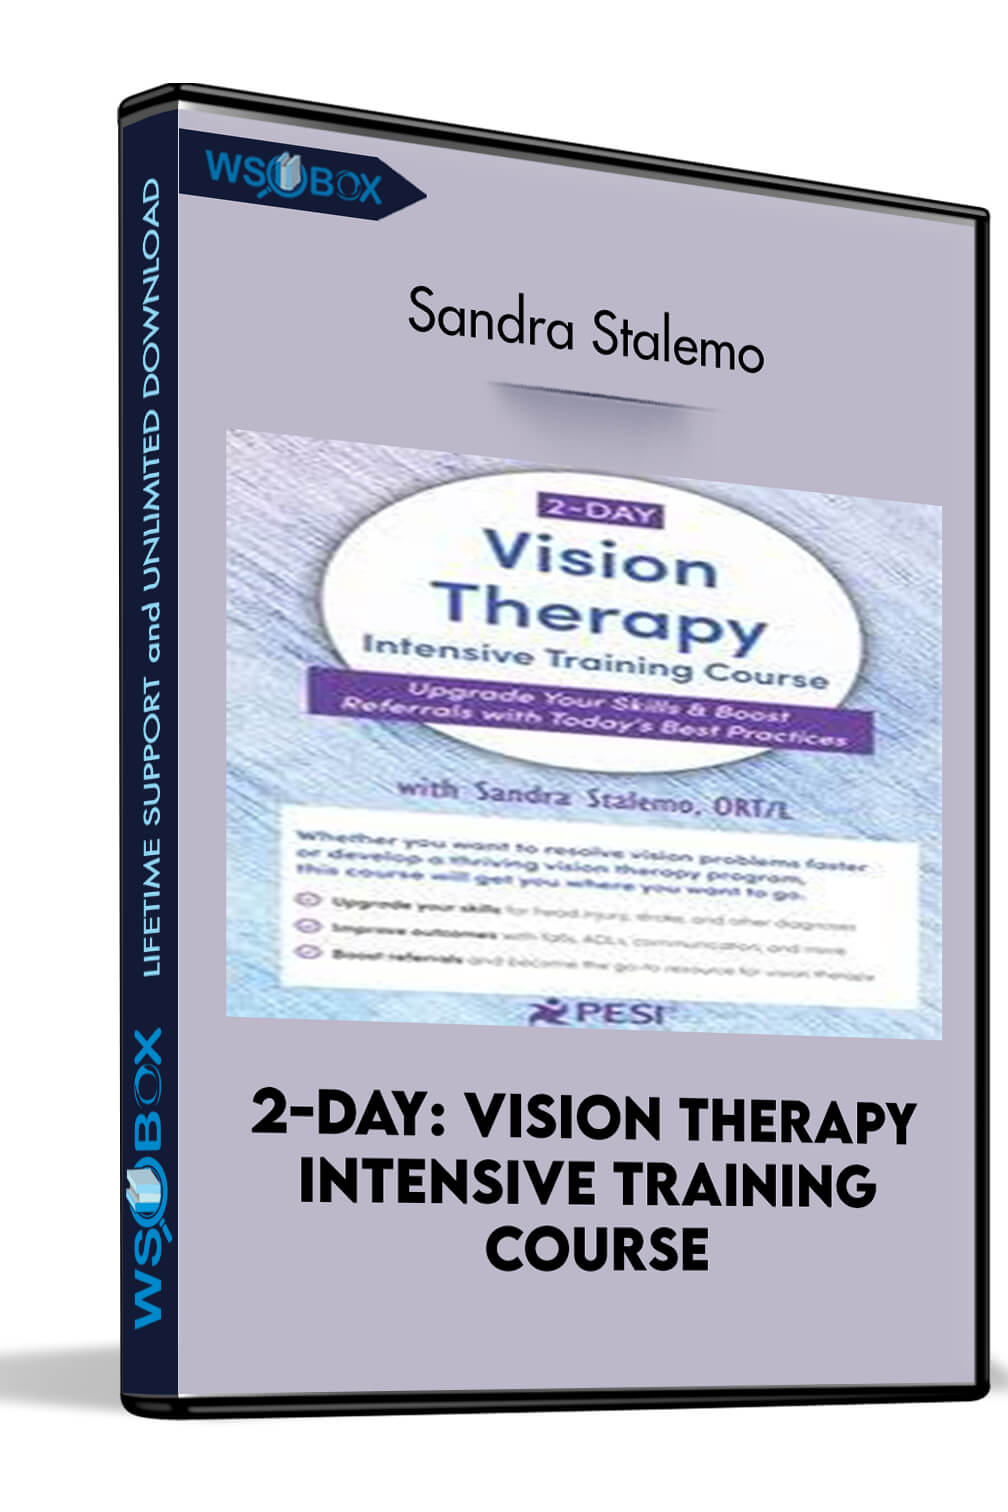 2-Day: Vision Therapy Intensive Training Course: Upgrade Your Skills and Boost Referrals with Today’s Best Practices – Sandra Stalemo